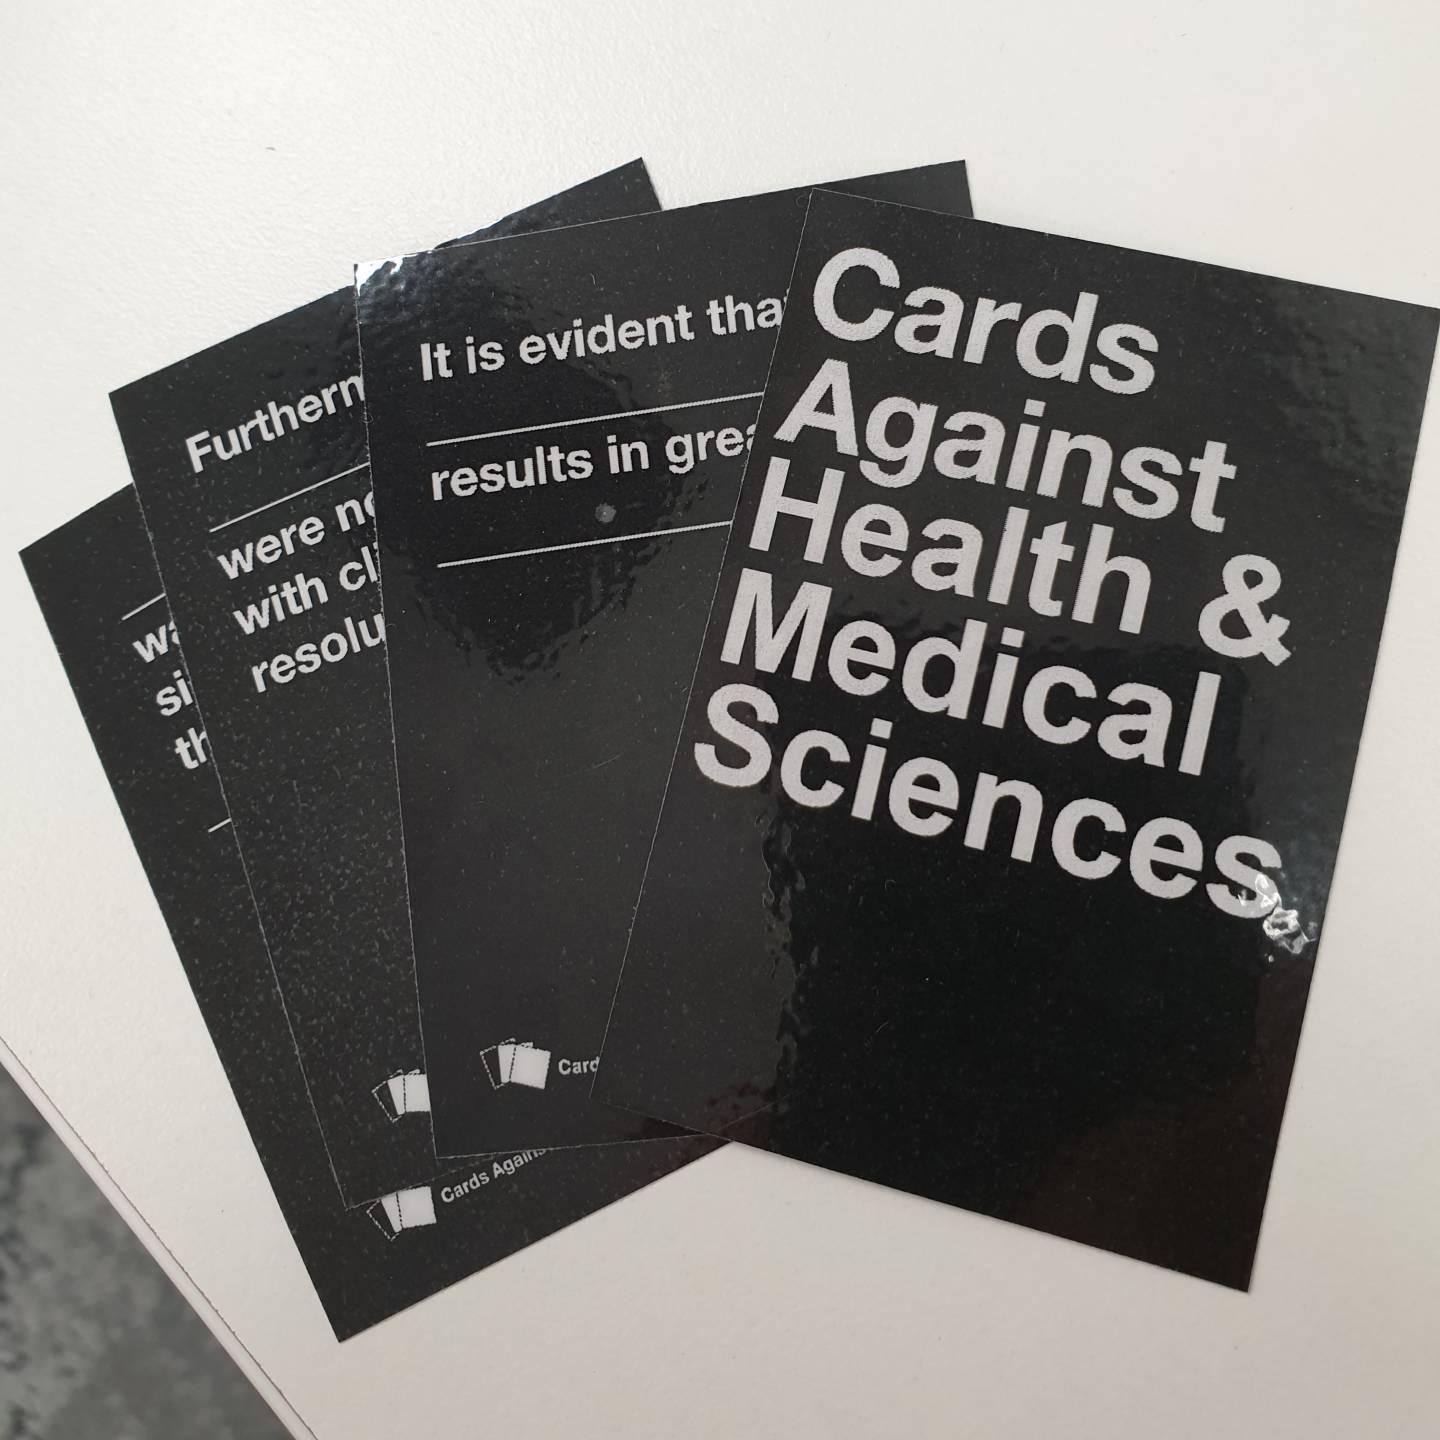 Cards Against Health and Medical Sciences